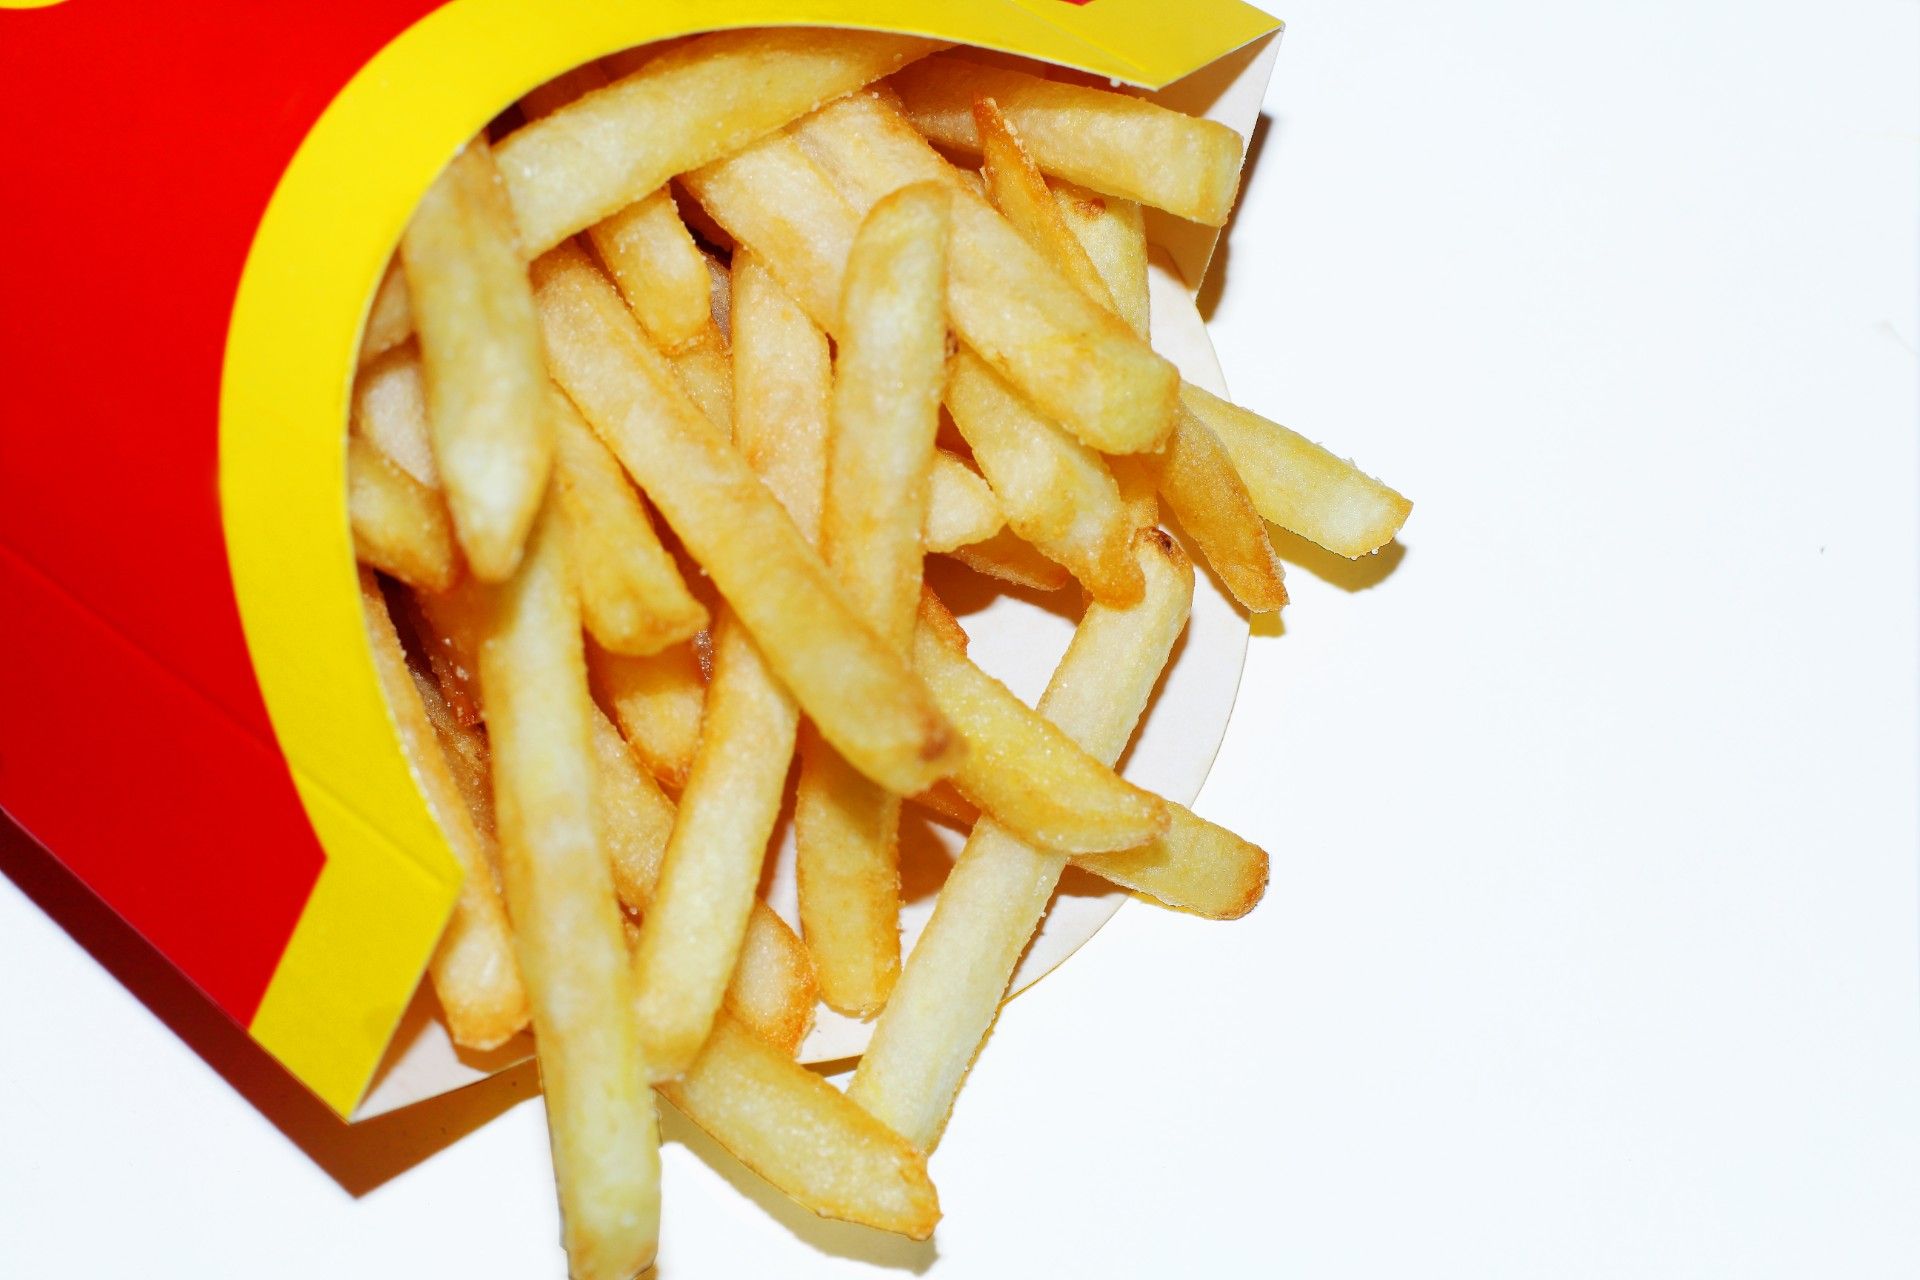 French fries in a red-and-yellow fast-food container, lying on white background